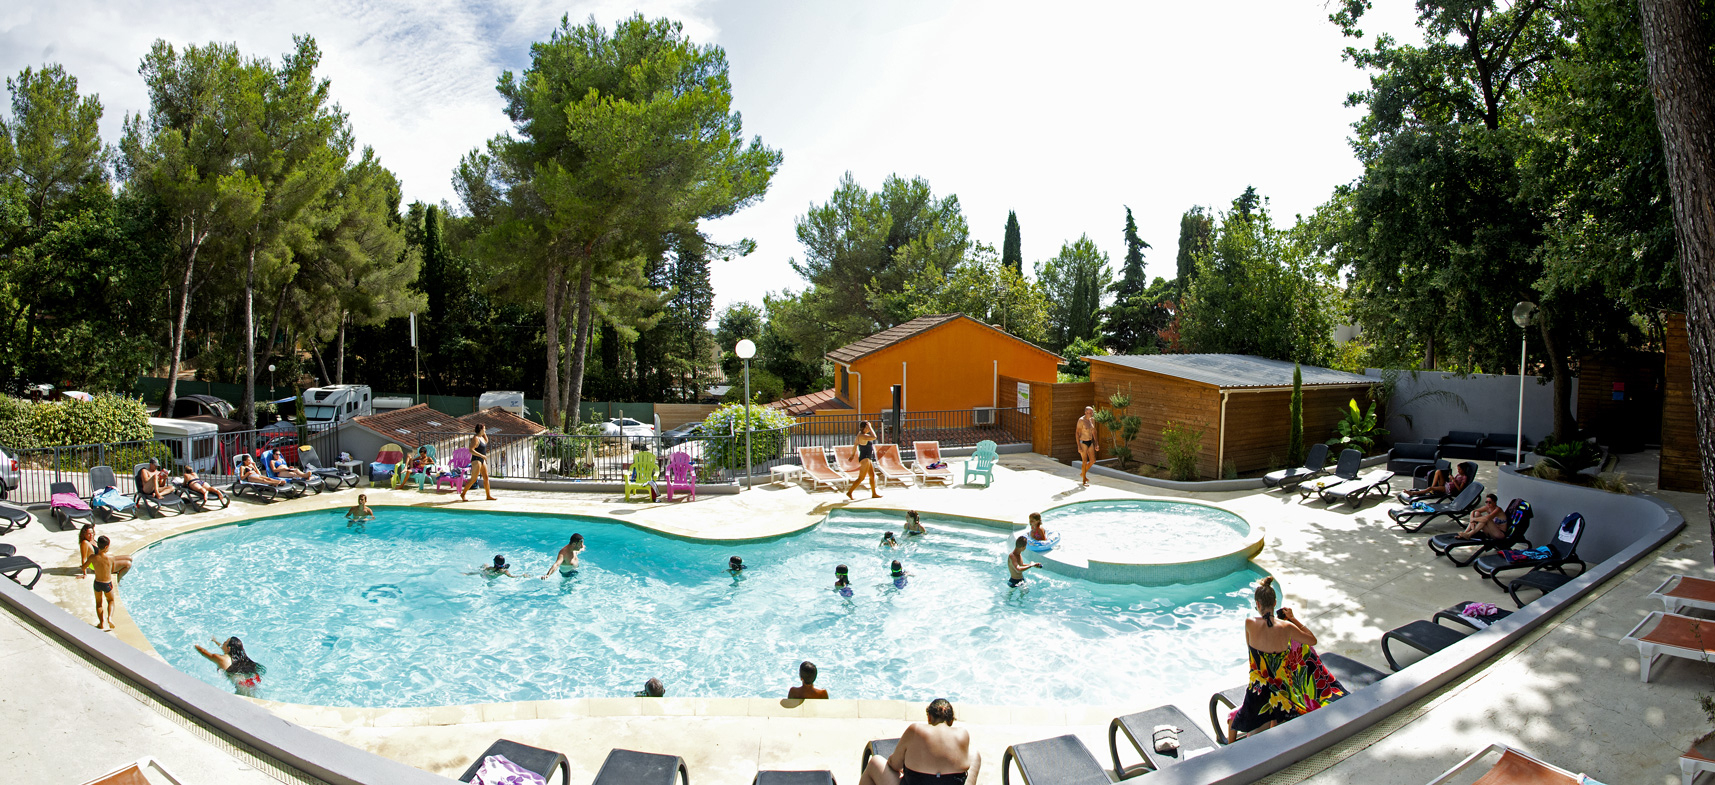 Camping Six Fours Les Plages | Camping Les Playes | Camping ... encequiconcerne Camping Bandol Avec Piscine